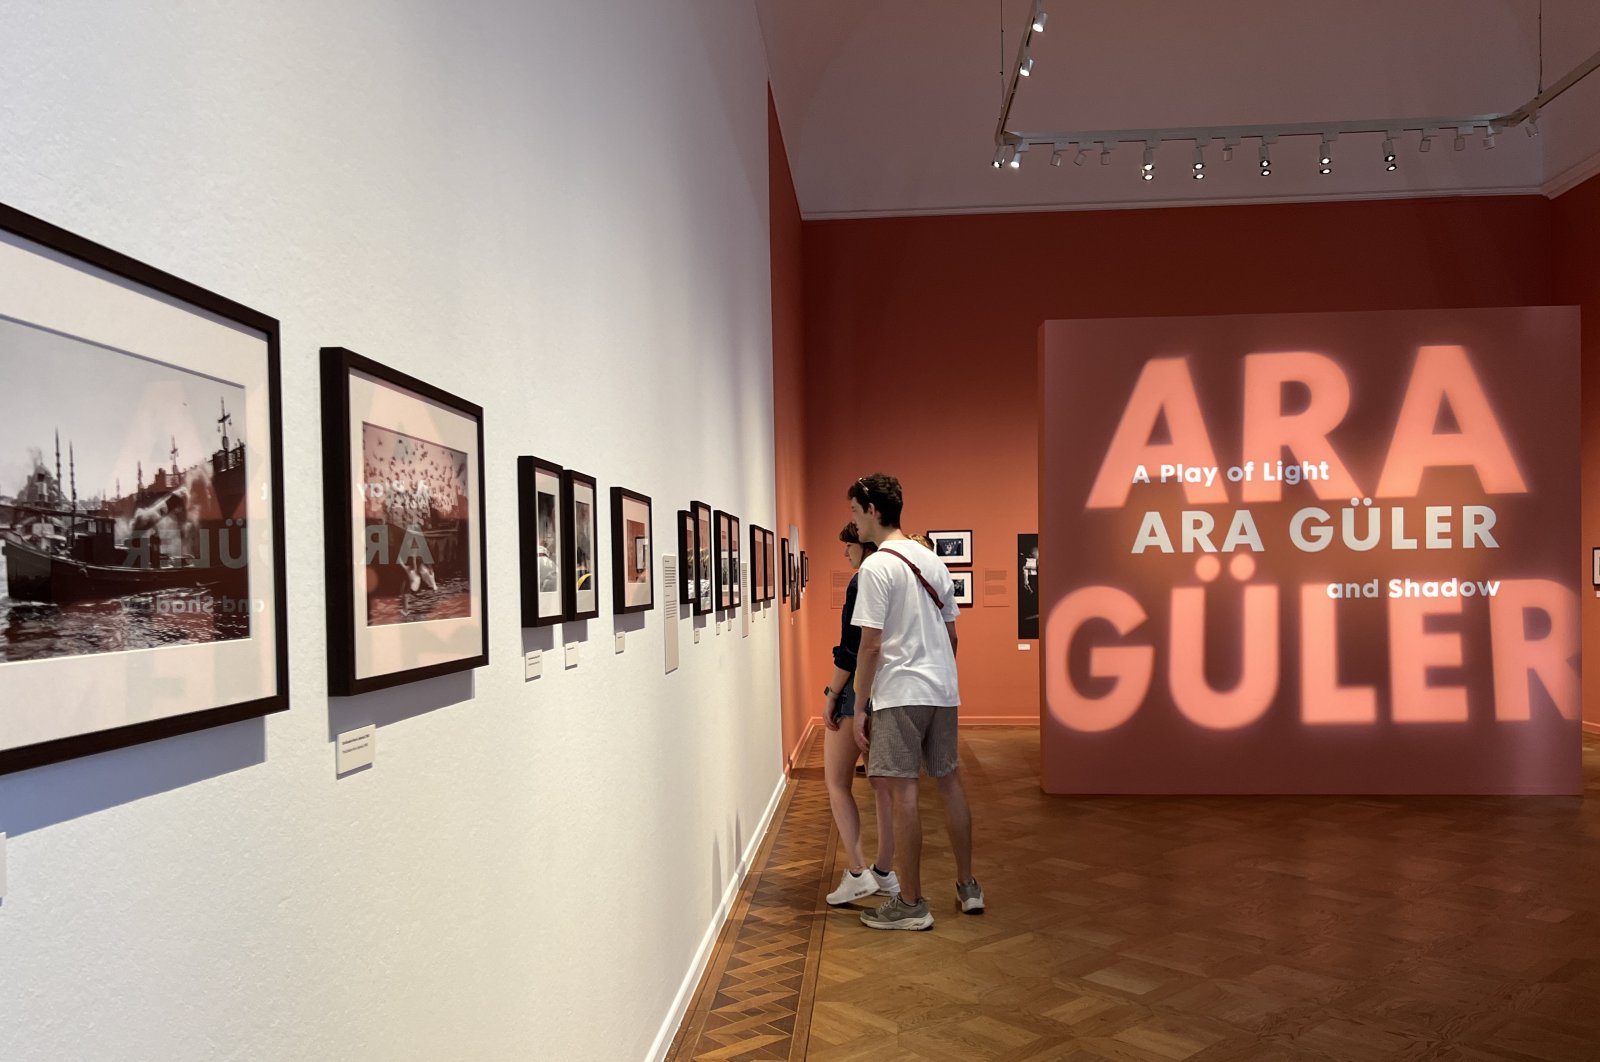 The "Ara Güler: A Play of Light and Shadow" photography exhibition, jointly organized by Foam Photography Museum, Ara Güler Museum, and Polat Studio, has met with Dutch art enthusiasts in Amsterdam, the Netherlands, June 26, 2023. (AA Photo)